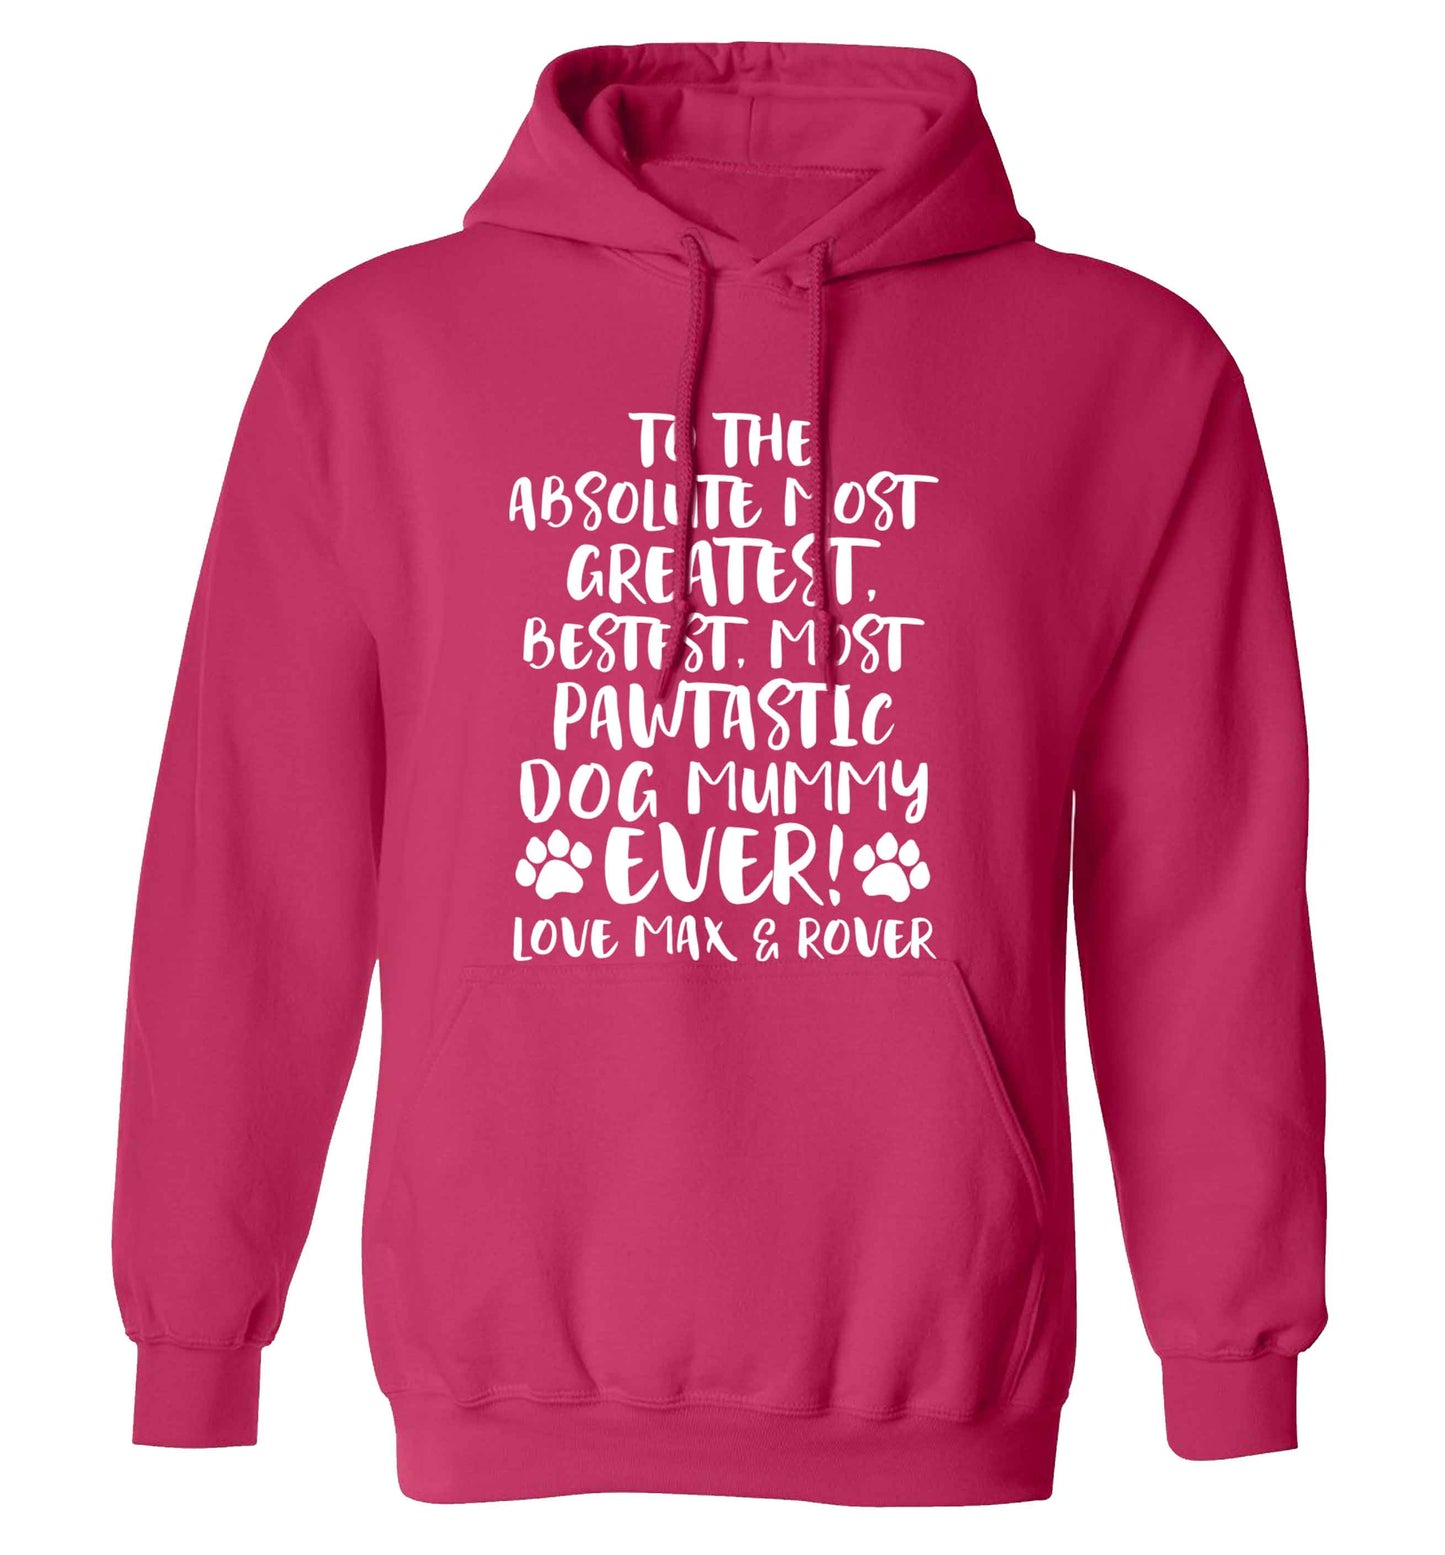 Personalsied to the most pawtastic dog mummy ever adults unisex pink hoodie 2XL